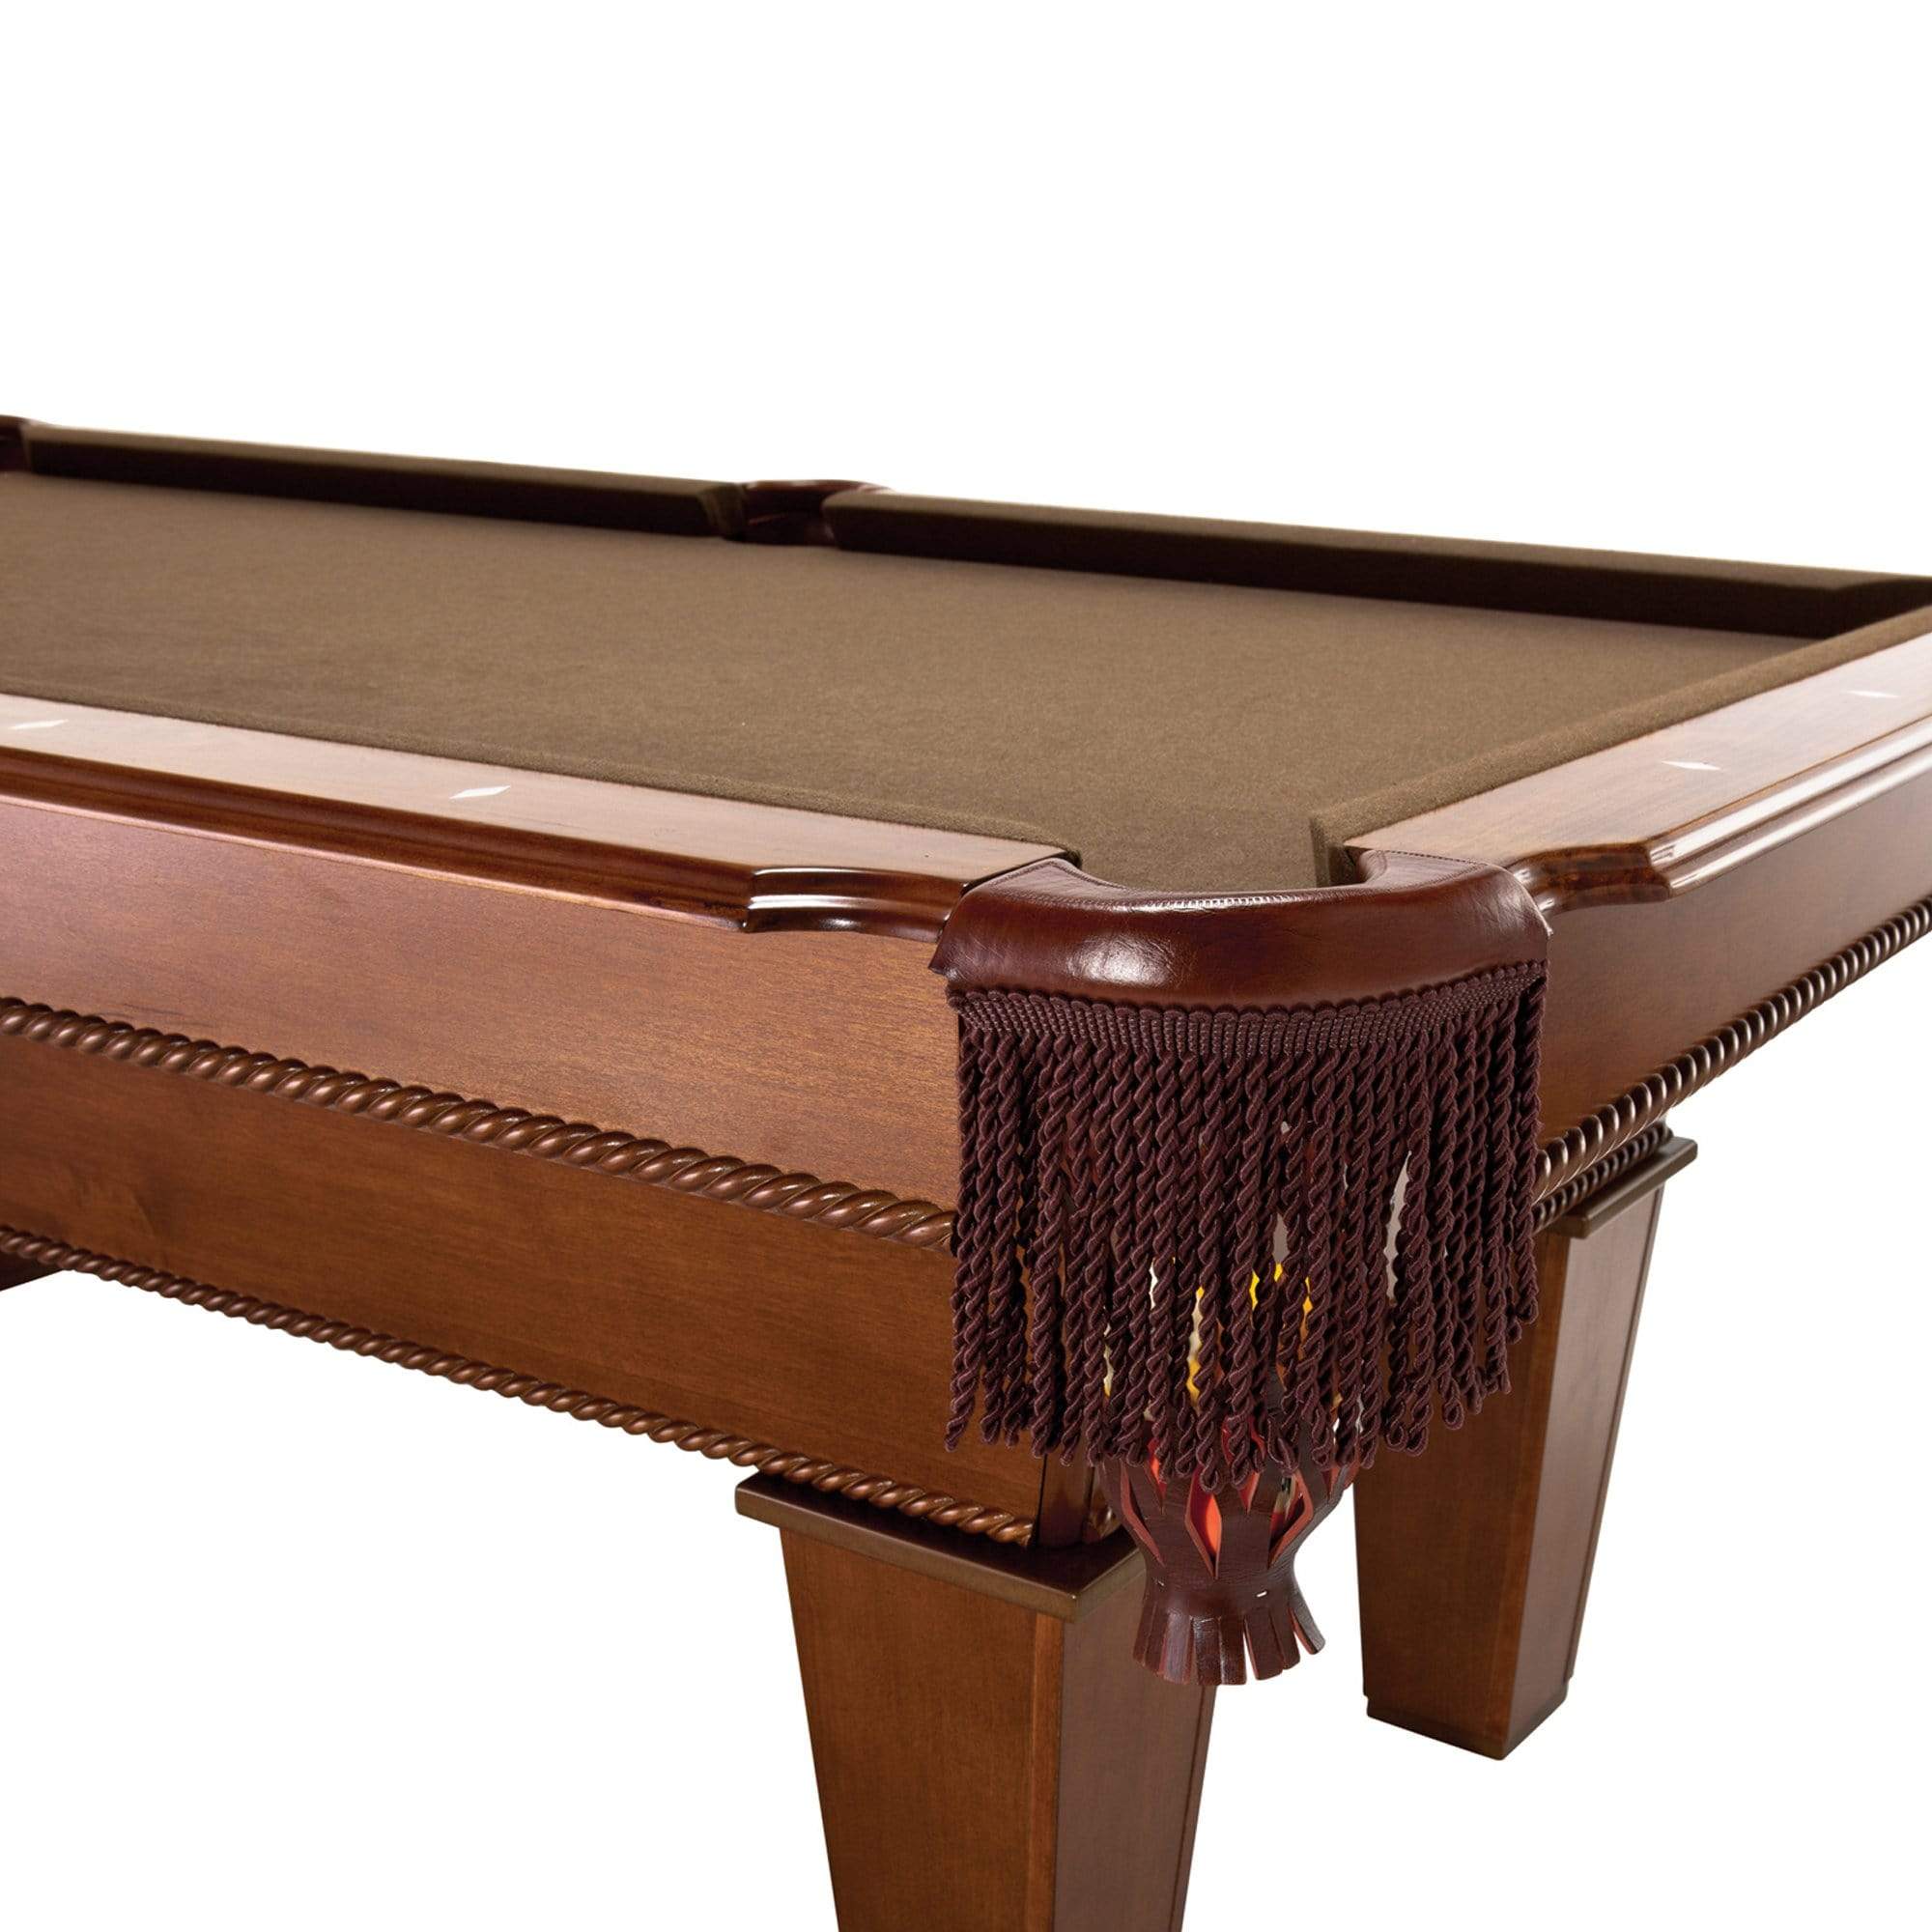 Fat Cat Pool Table Brown / As shown Fat Cat Frisco 7.5' Billiard Table with Play Package